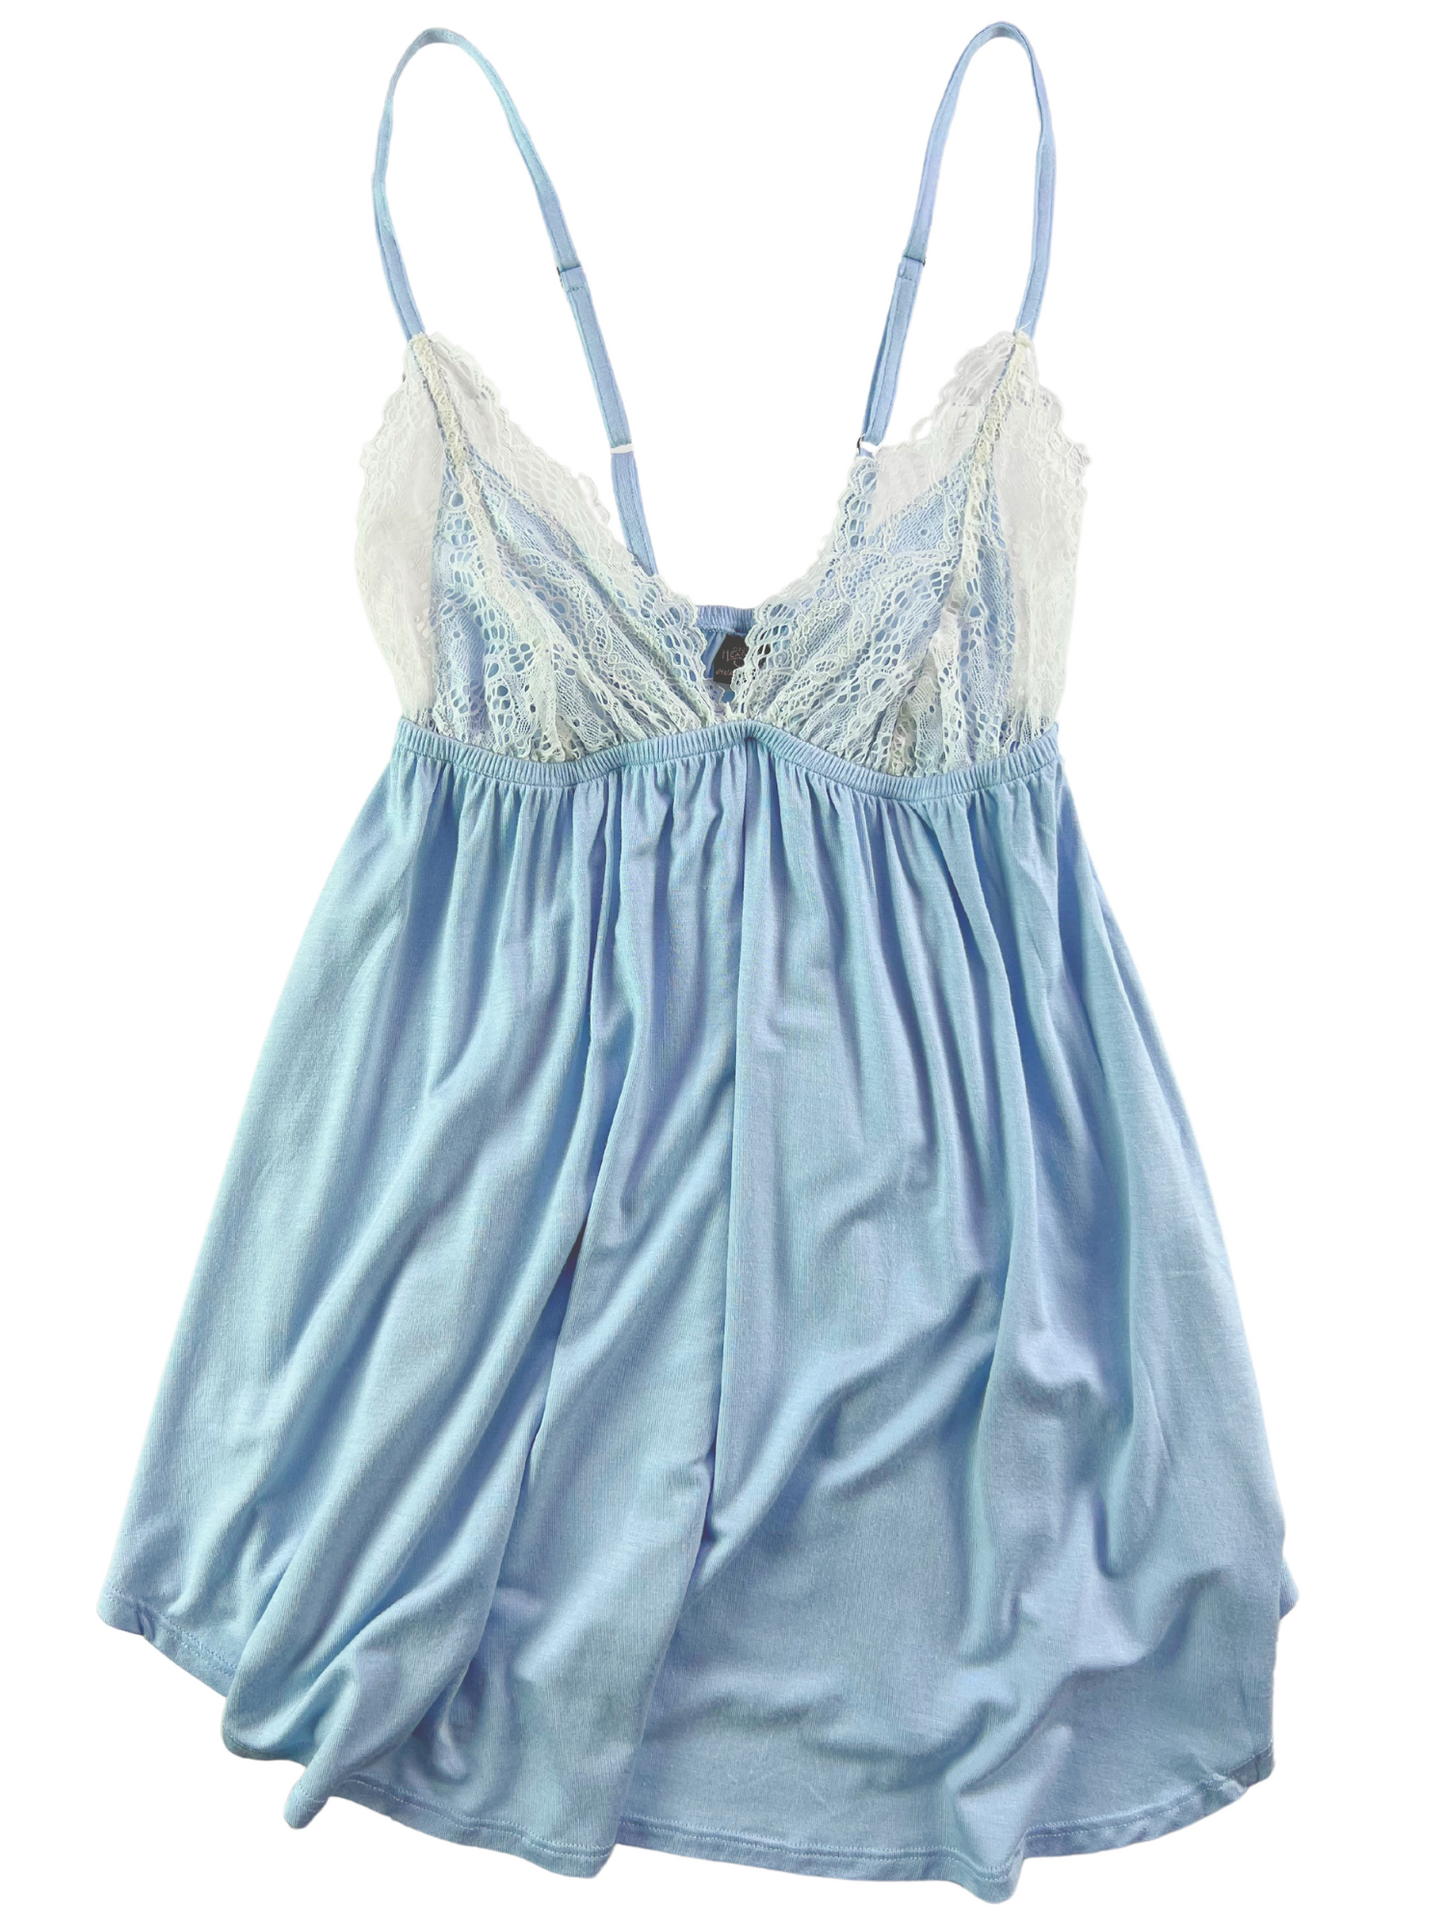 Venice Babydoll with Lace